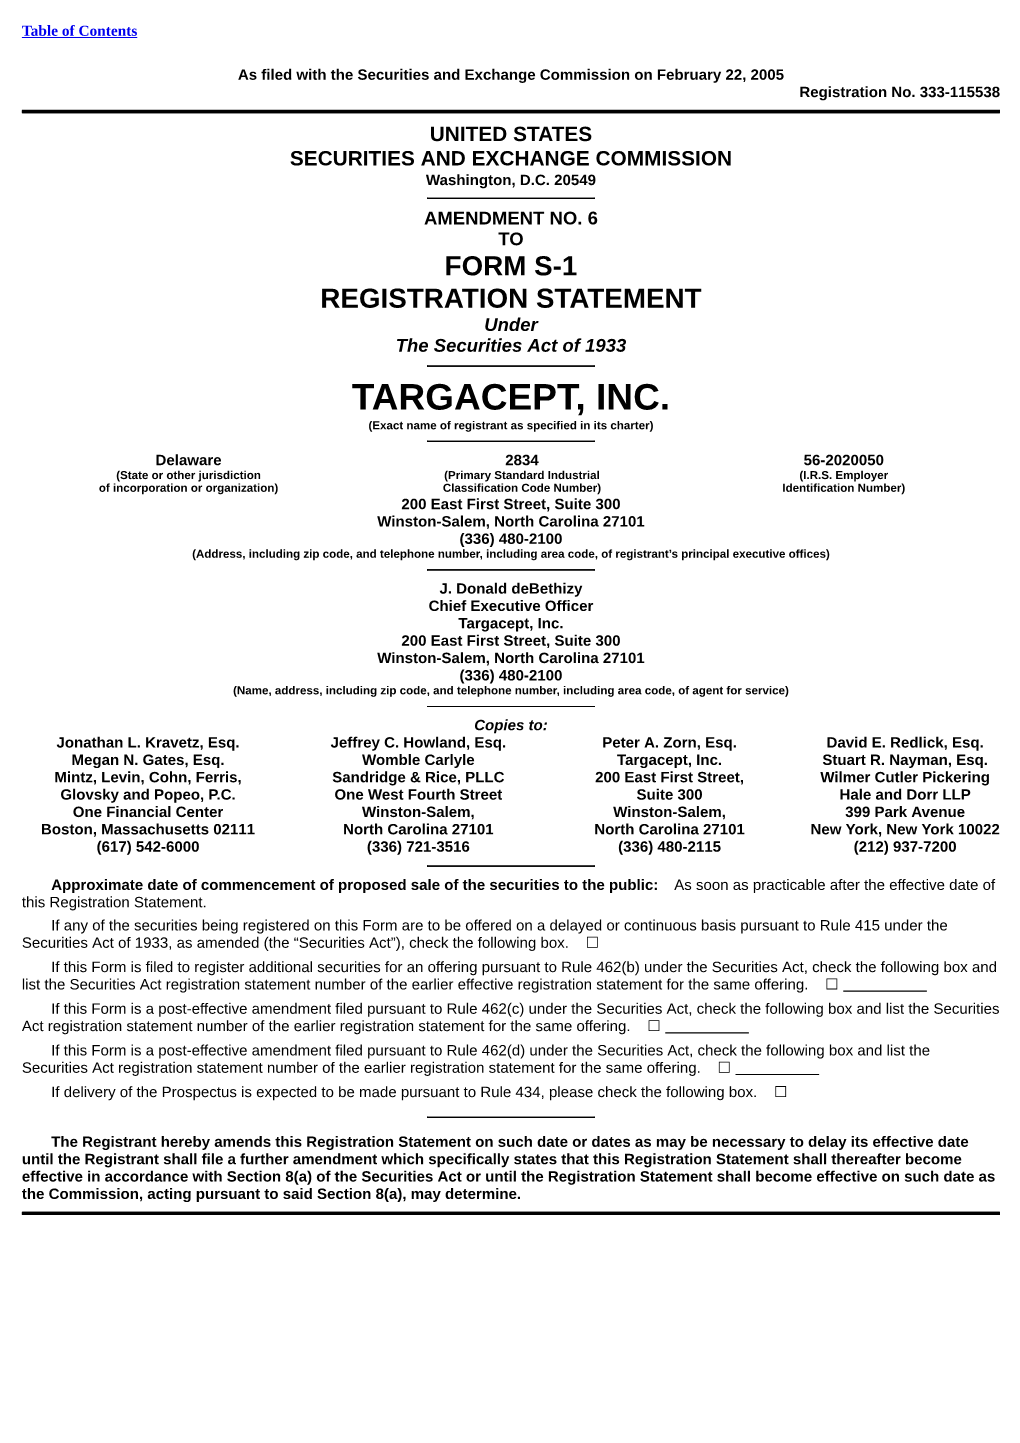 TARGACEPT, INC. (Exact Name of Registrant As Specified in Its Charter)